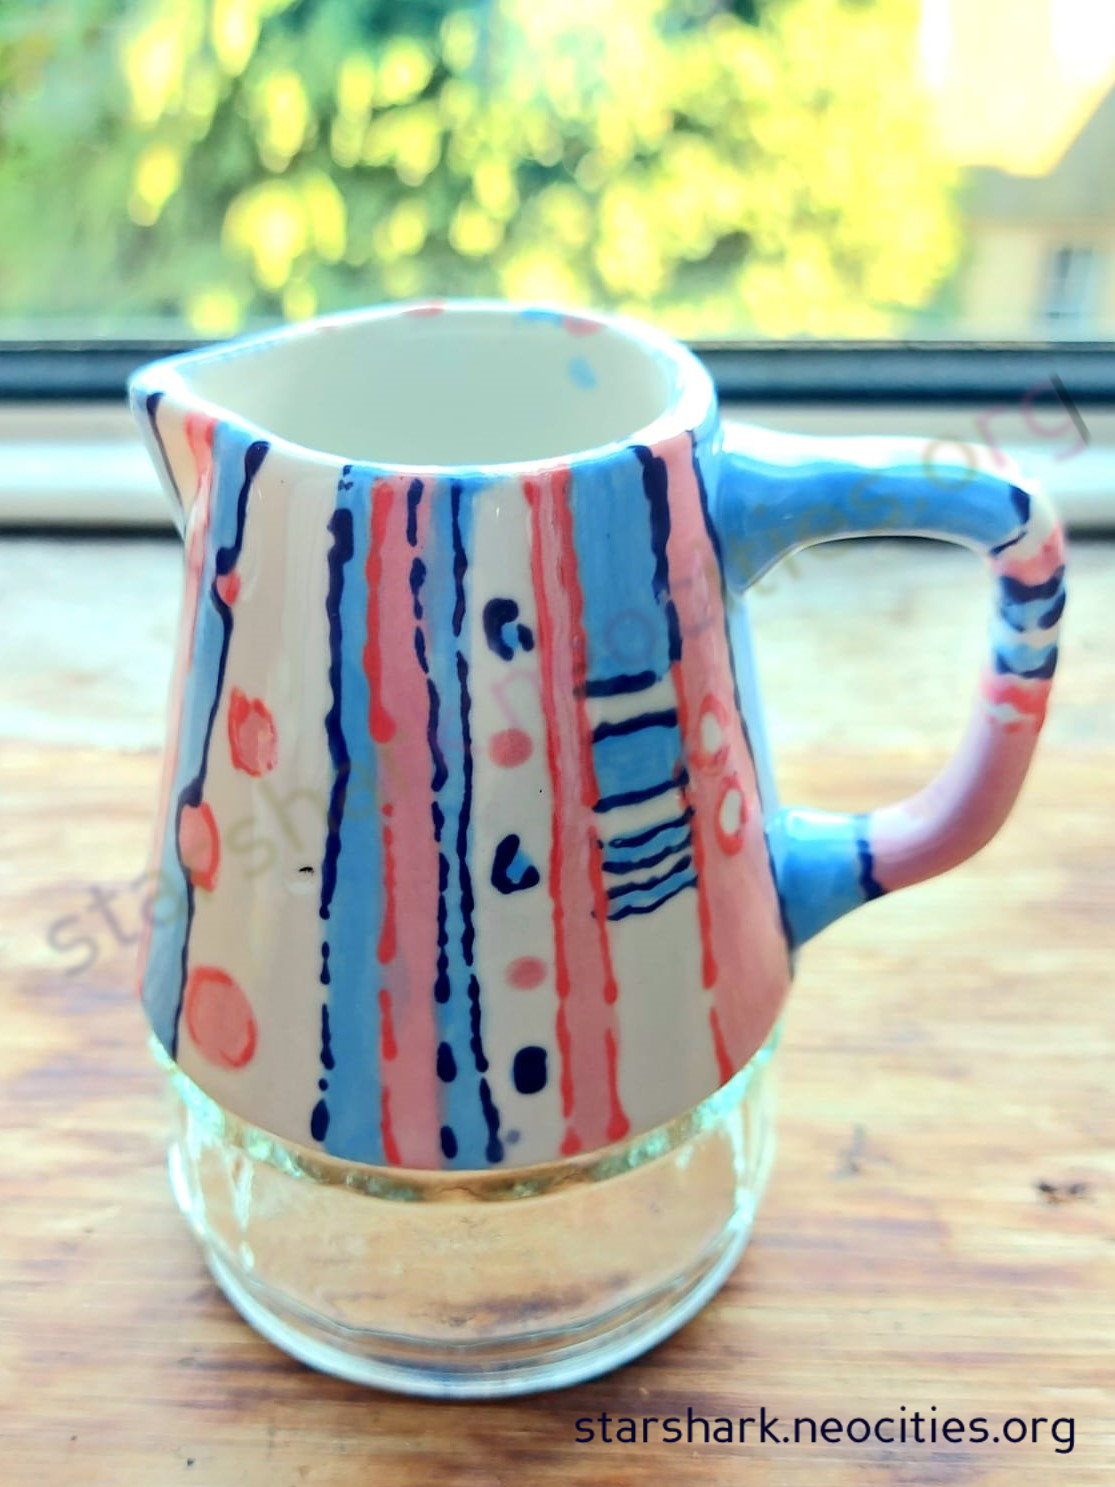 a ceramic milk jug painted in blue, pink and white.